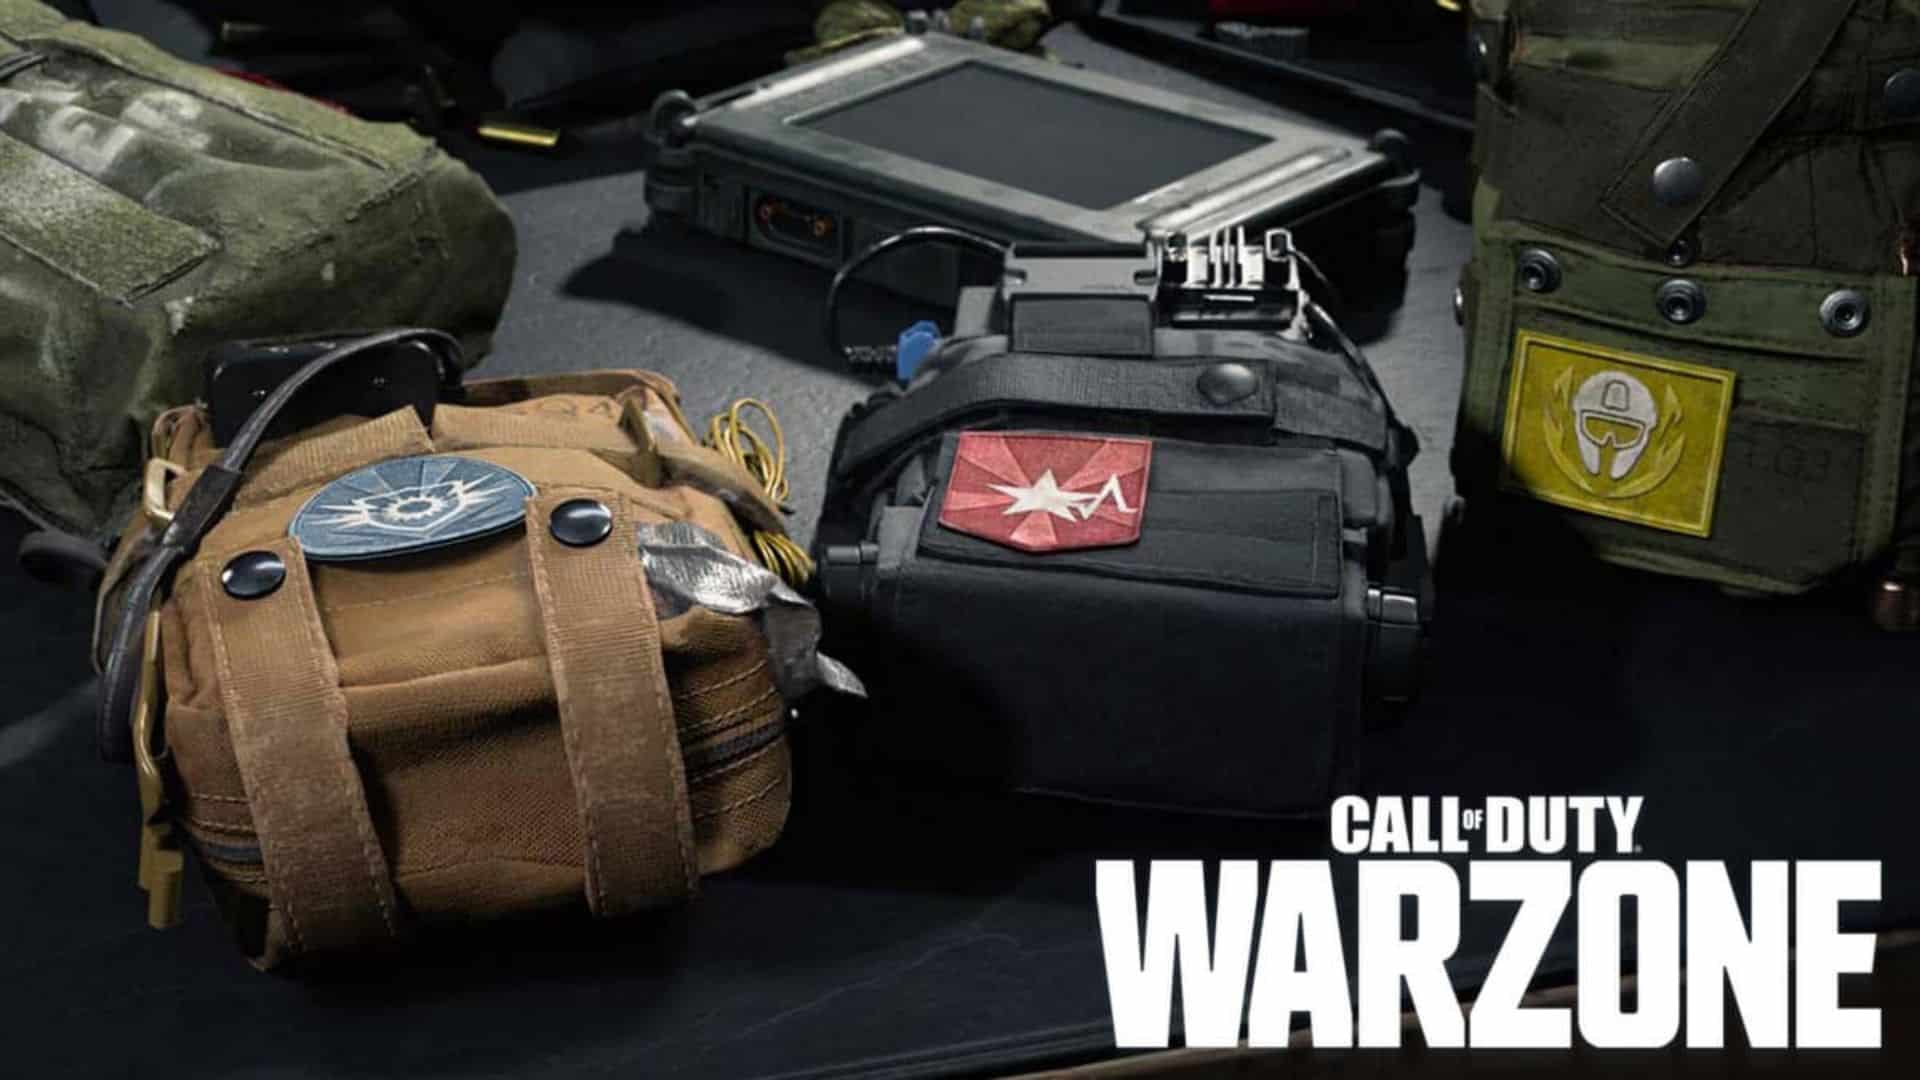 Warzone perks laid out on gunsmith table